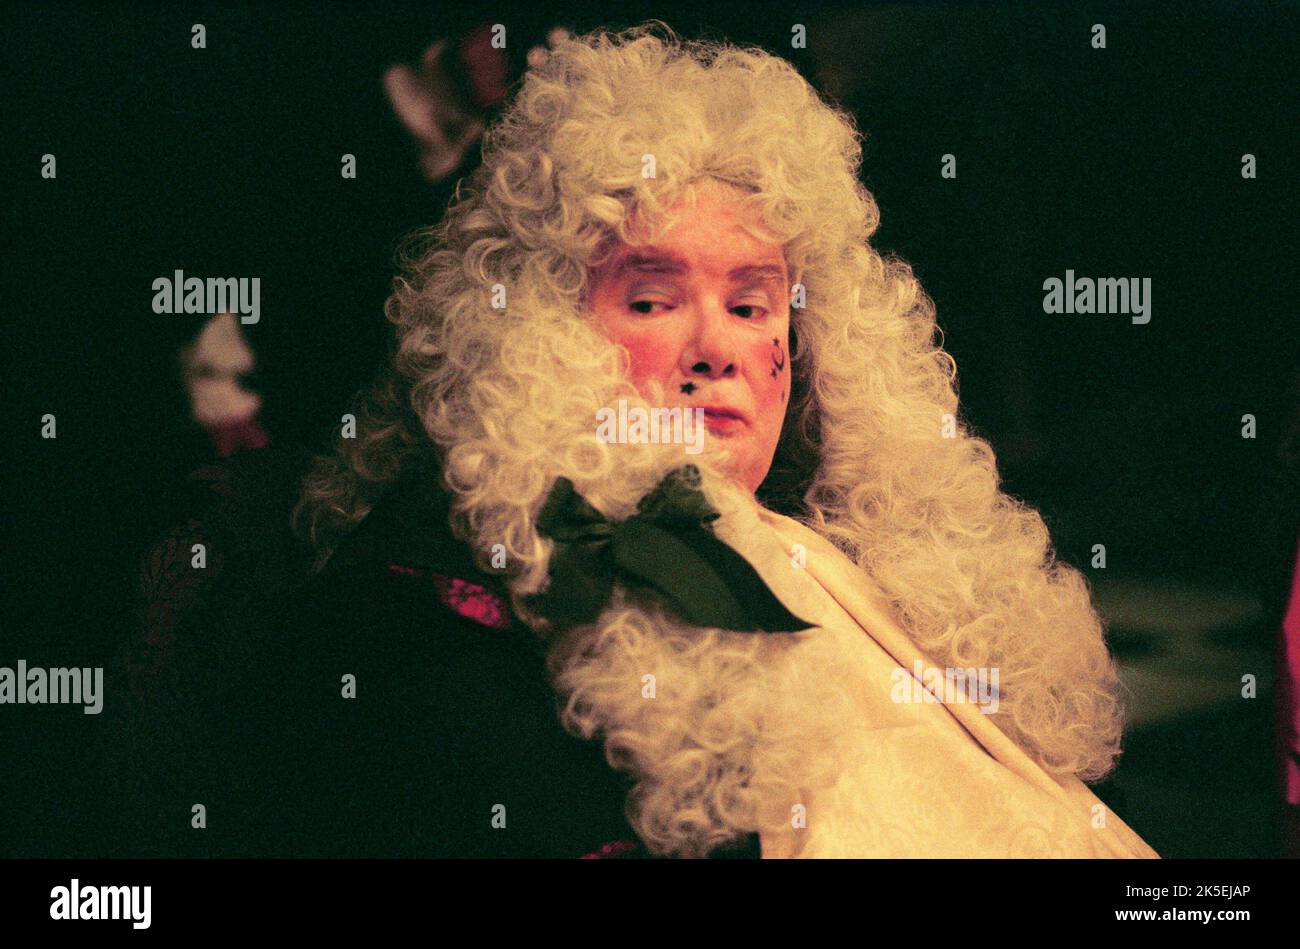 RICHARD GRIFFITHS, STAGE BEAUTY, 2004 Stock Photo